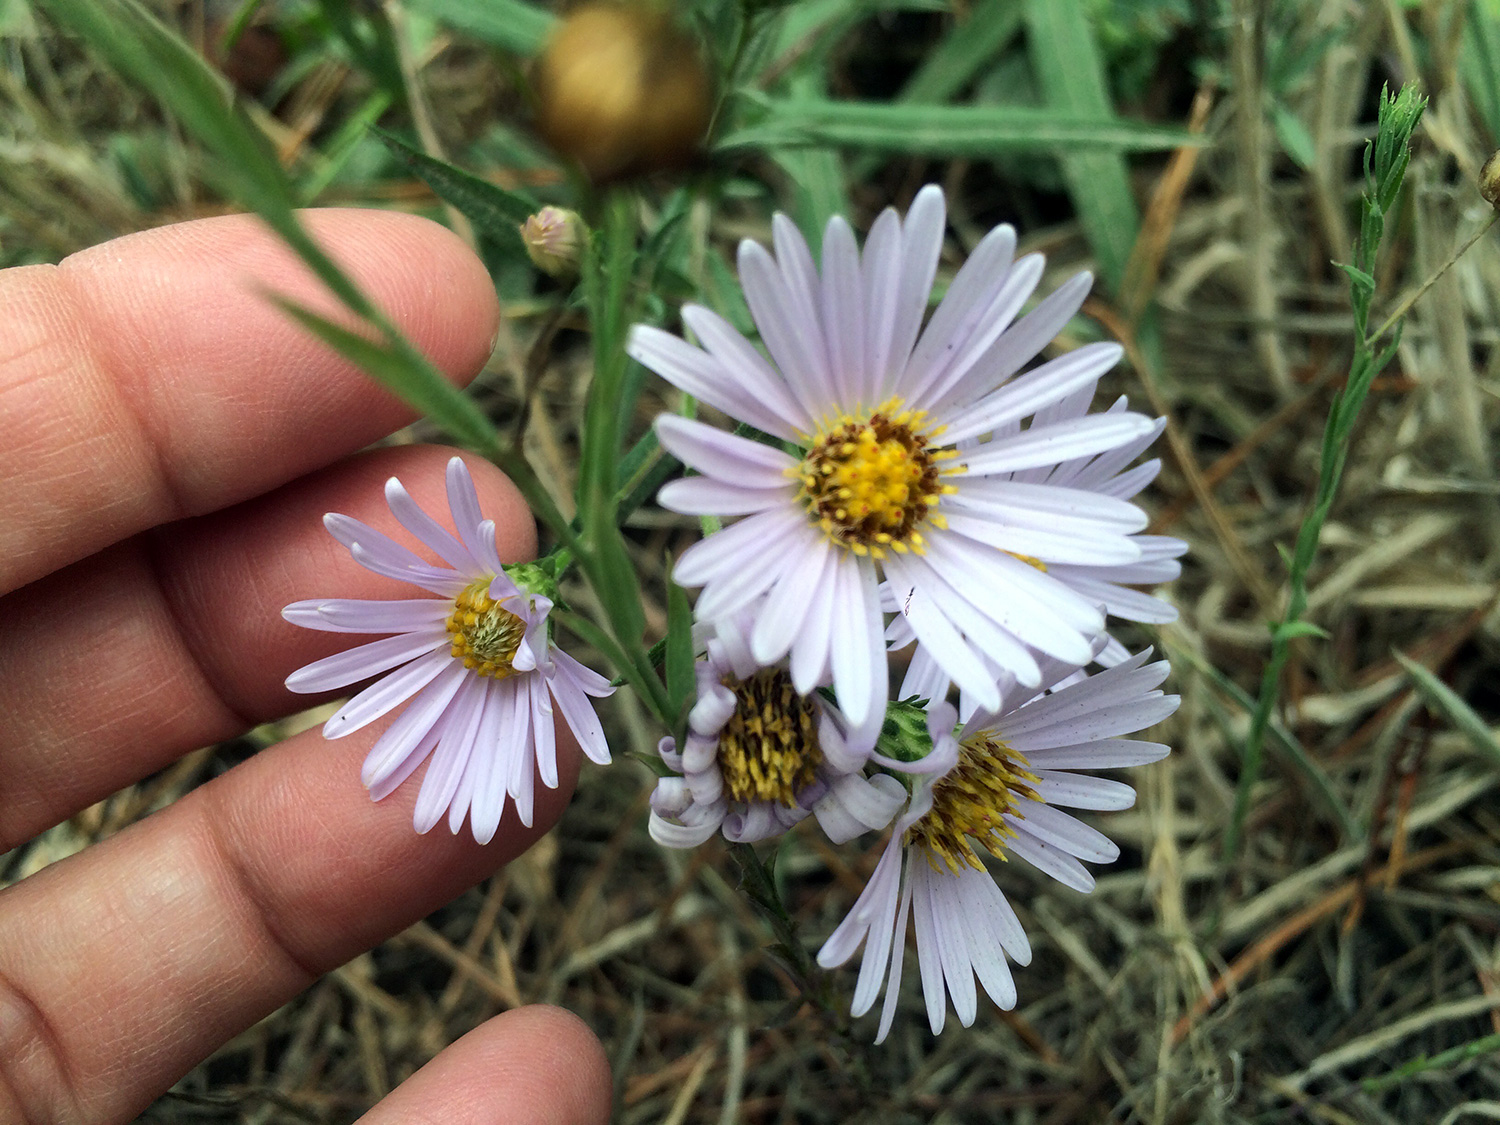 Pacific Aster (Symphyotrichum chilense)